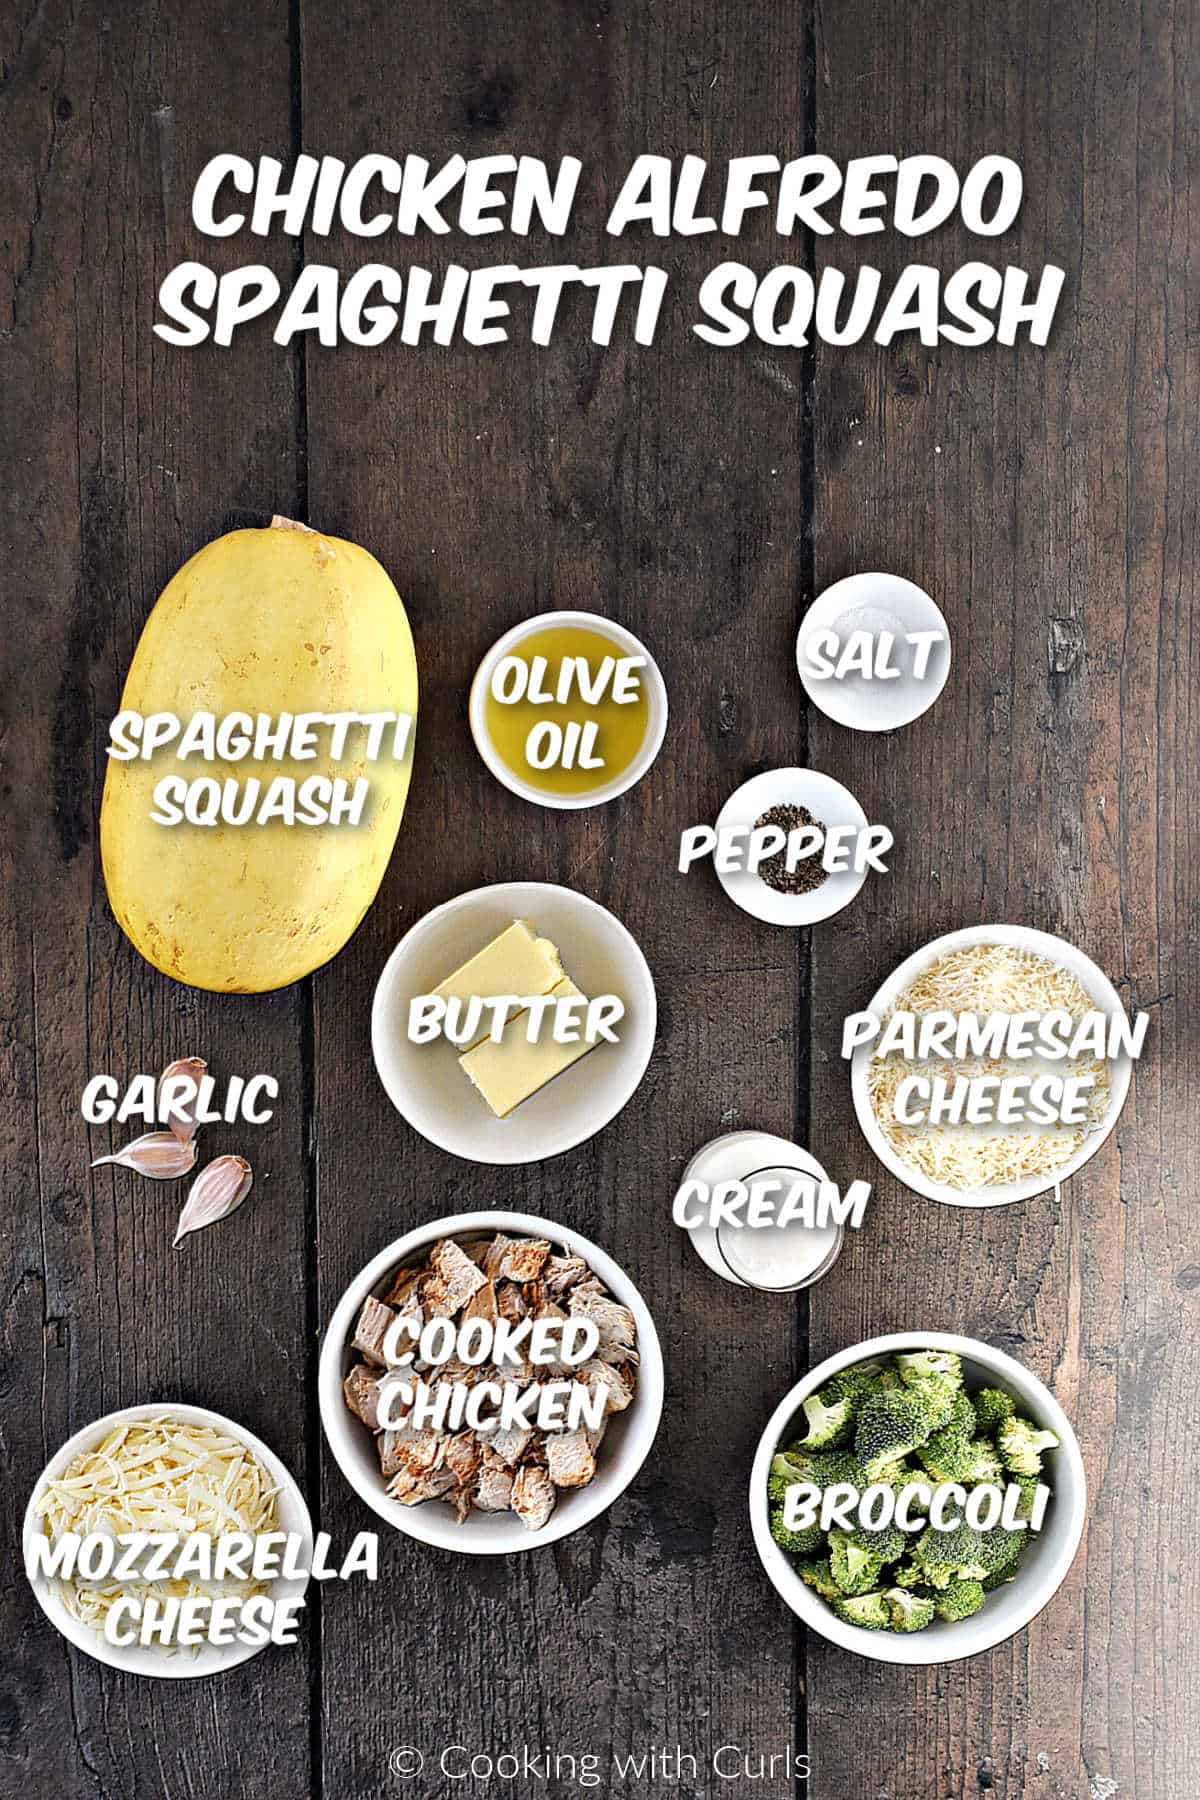 Ingredients to make chicken alfredo spaghetti squash with broccoli and melty cheese.